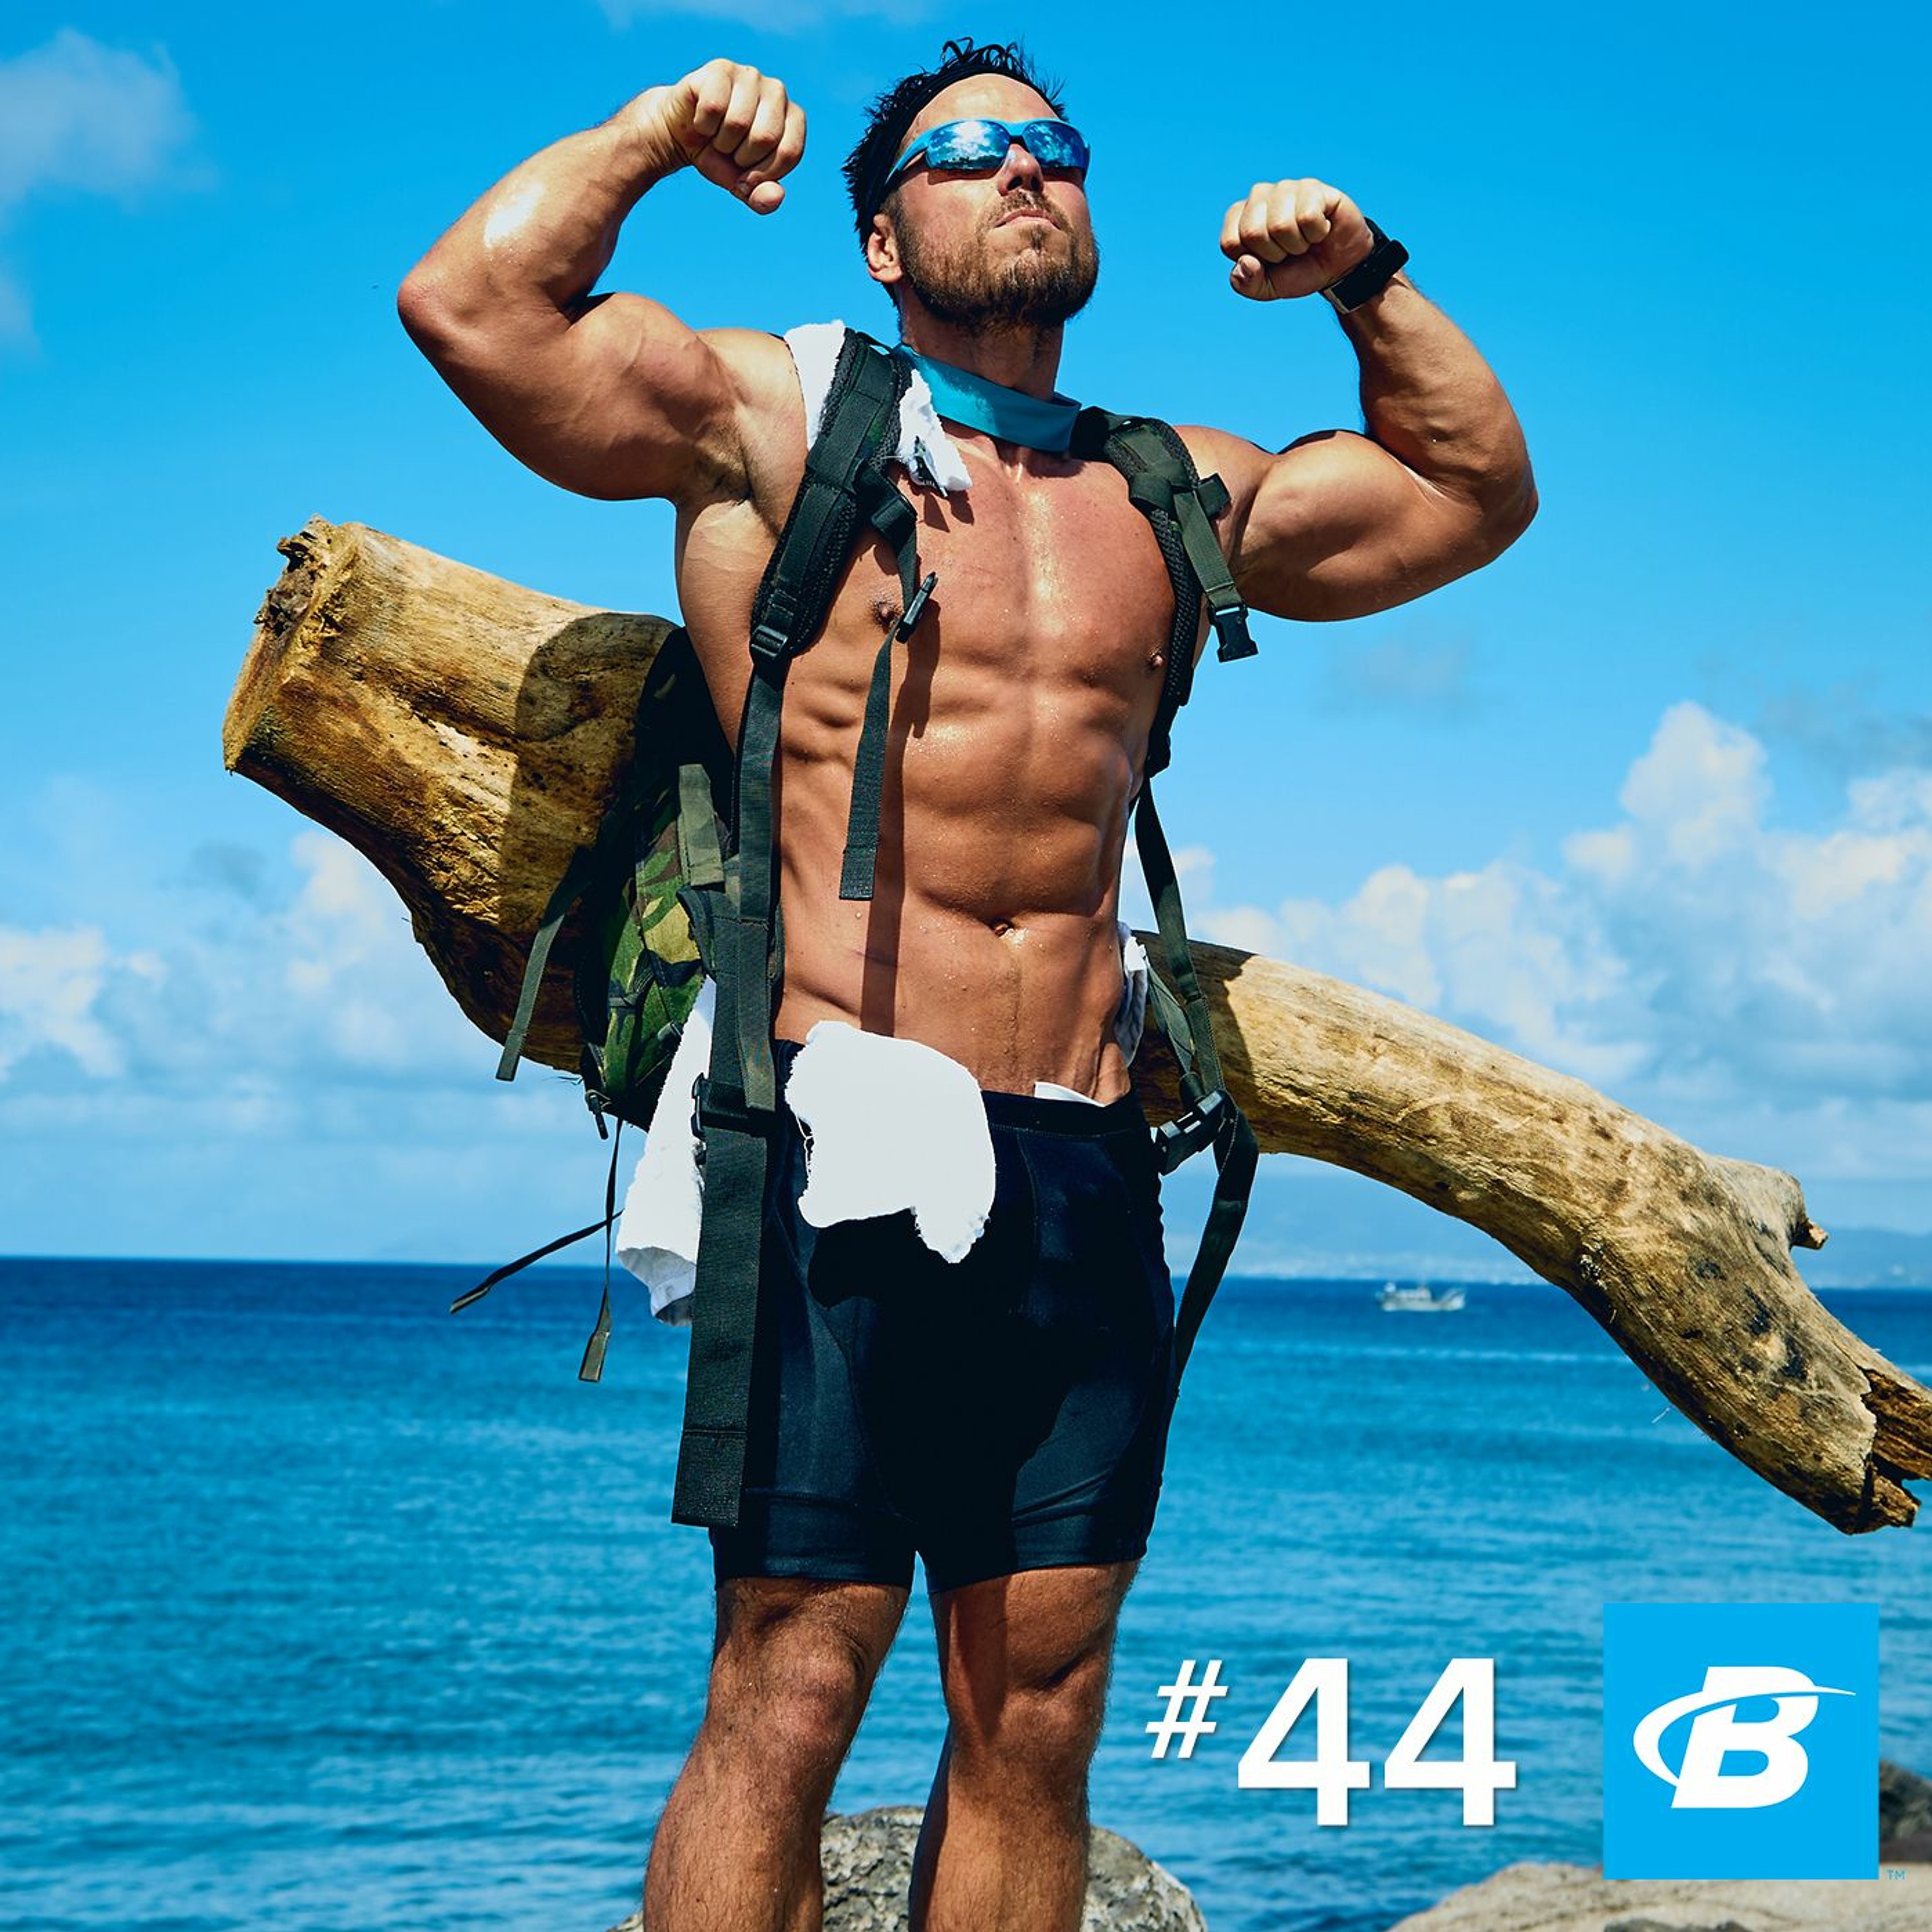 Episode 44: The World's Fittest Podcast Episode with Ross Edgley